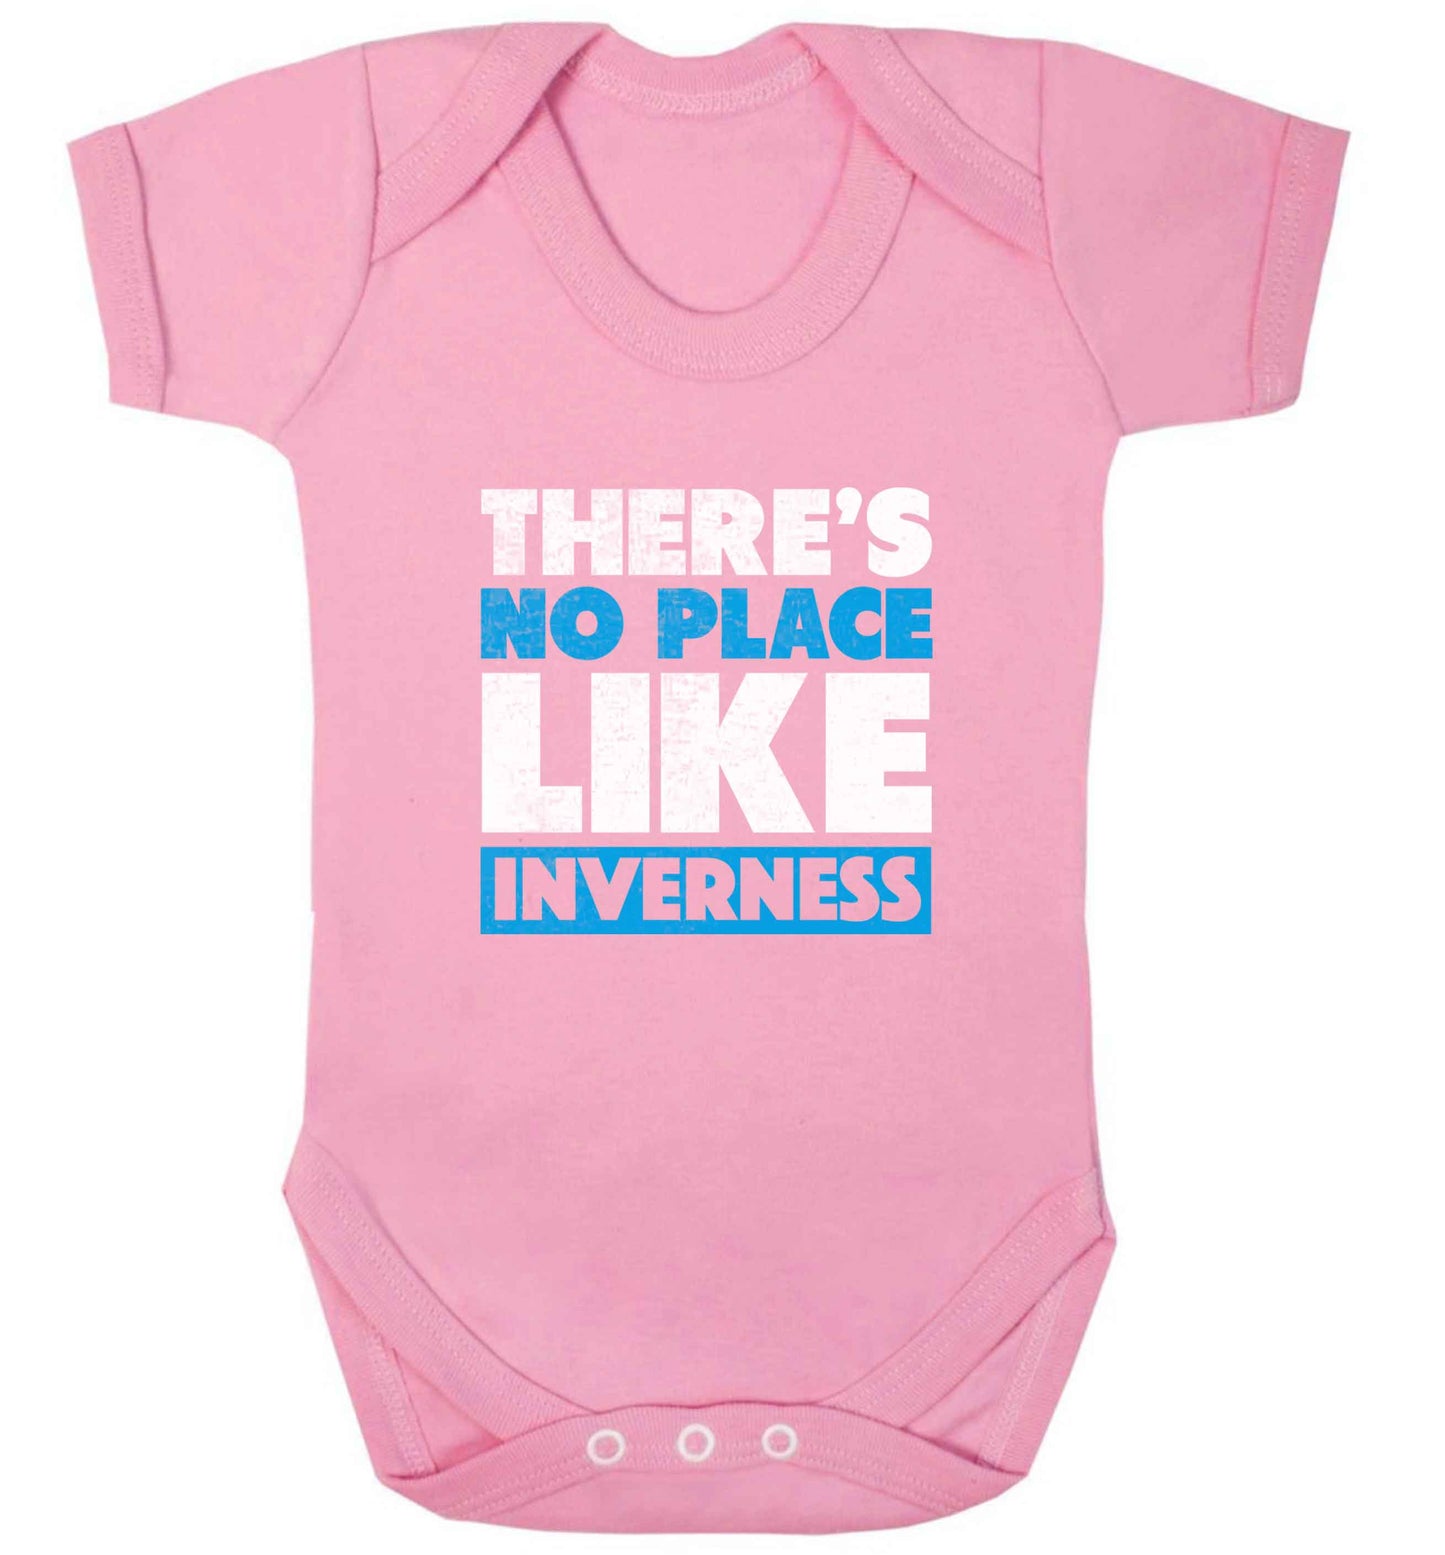 There's no place like Inverness baby vest pale pink 18-24 months